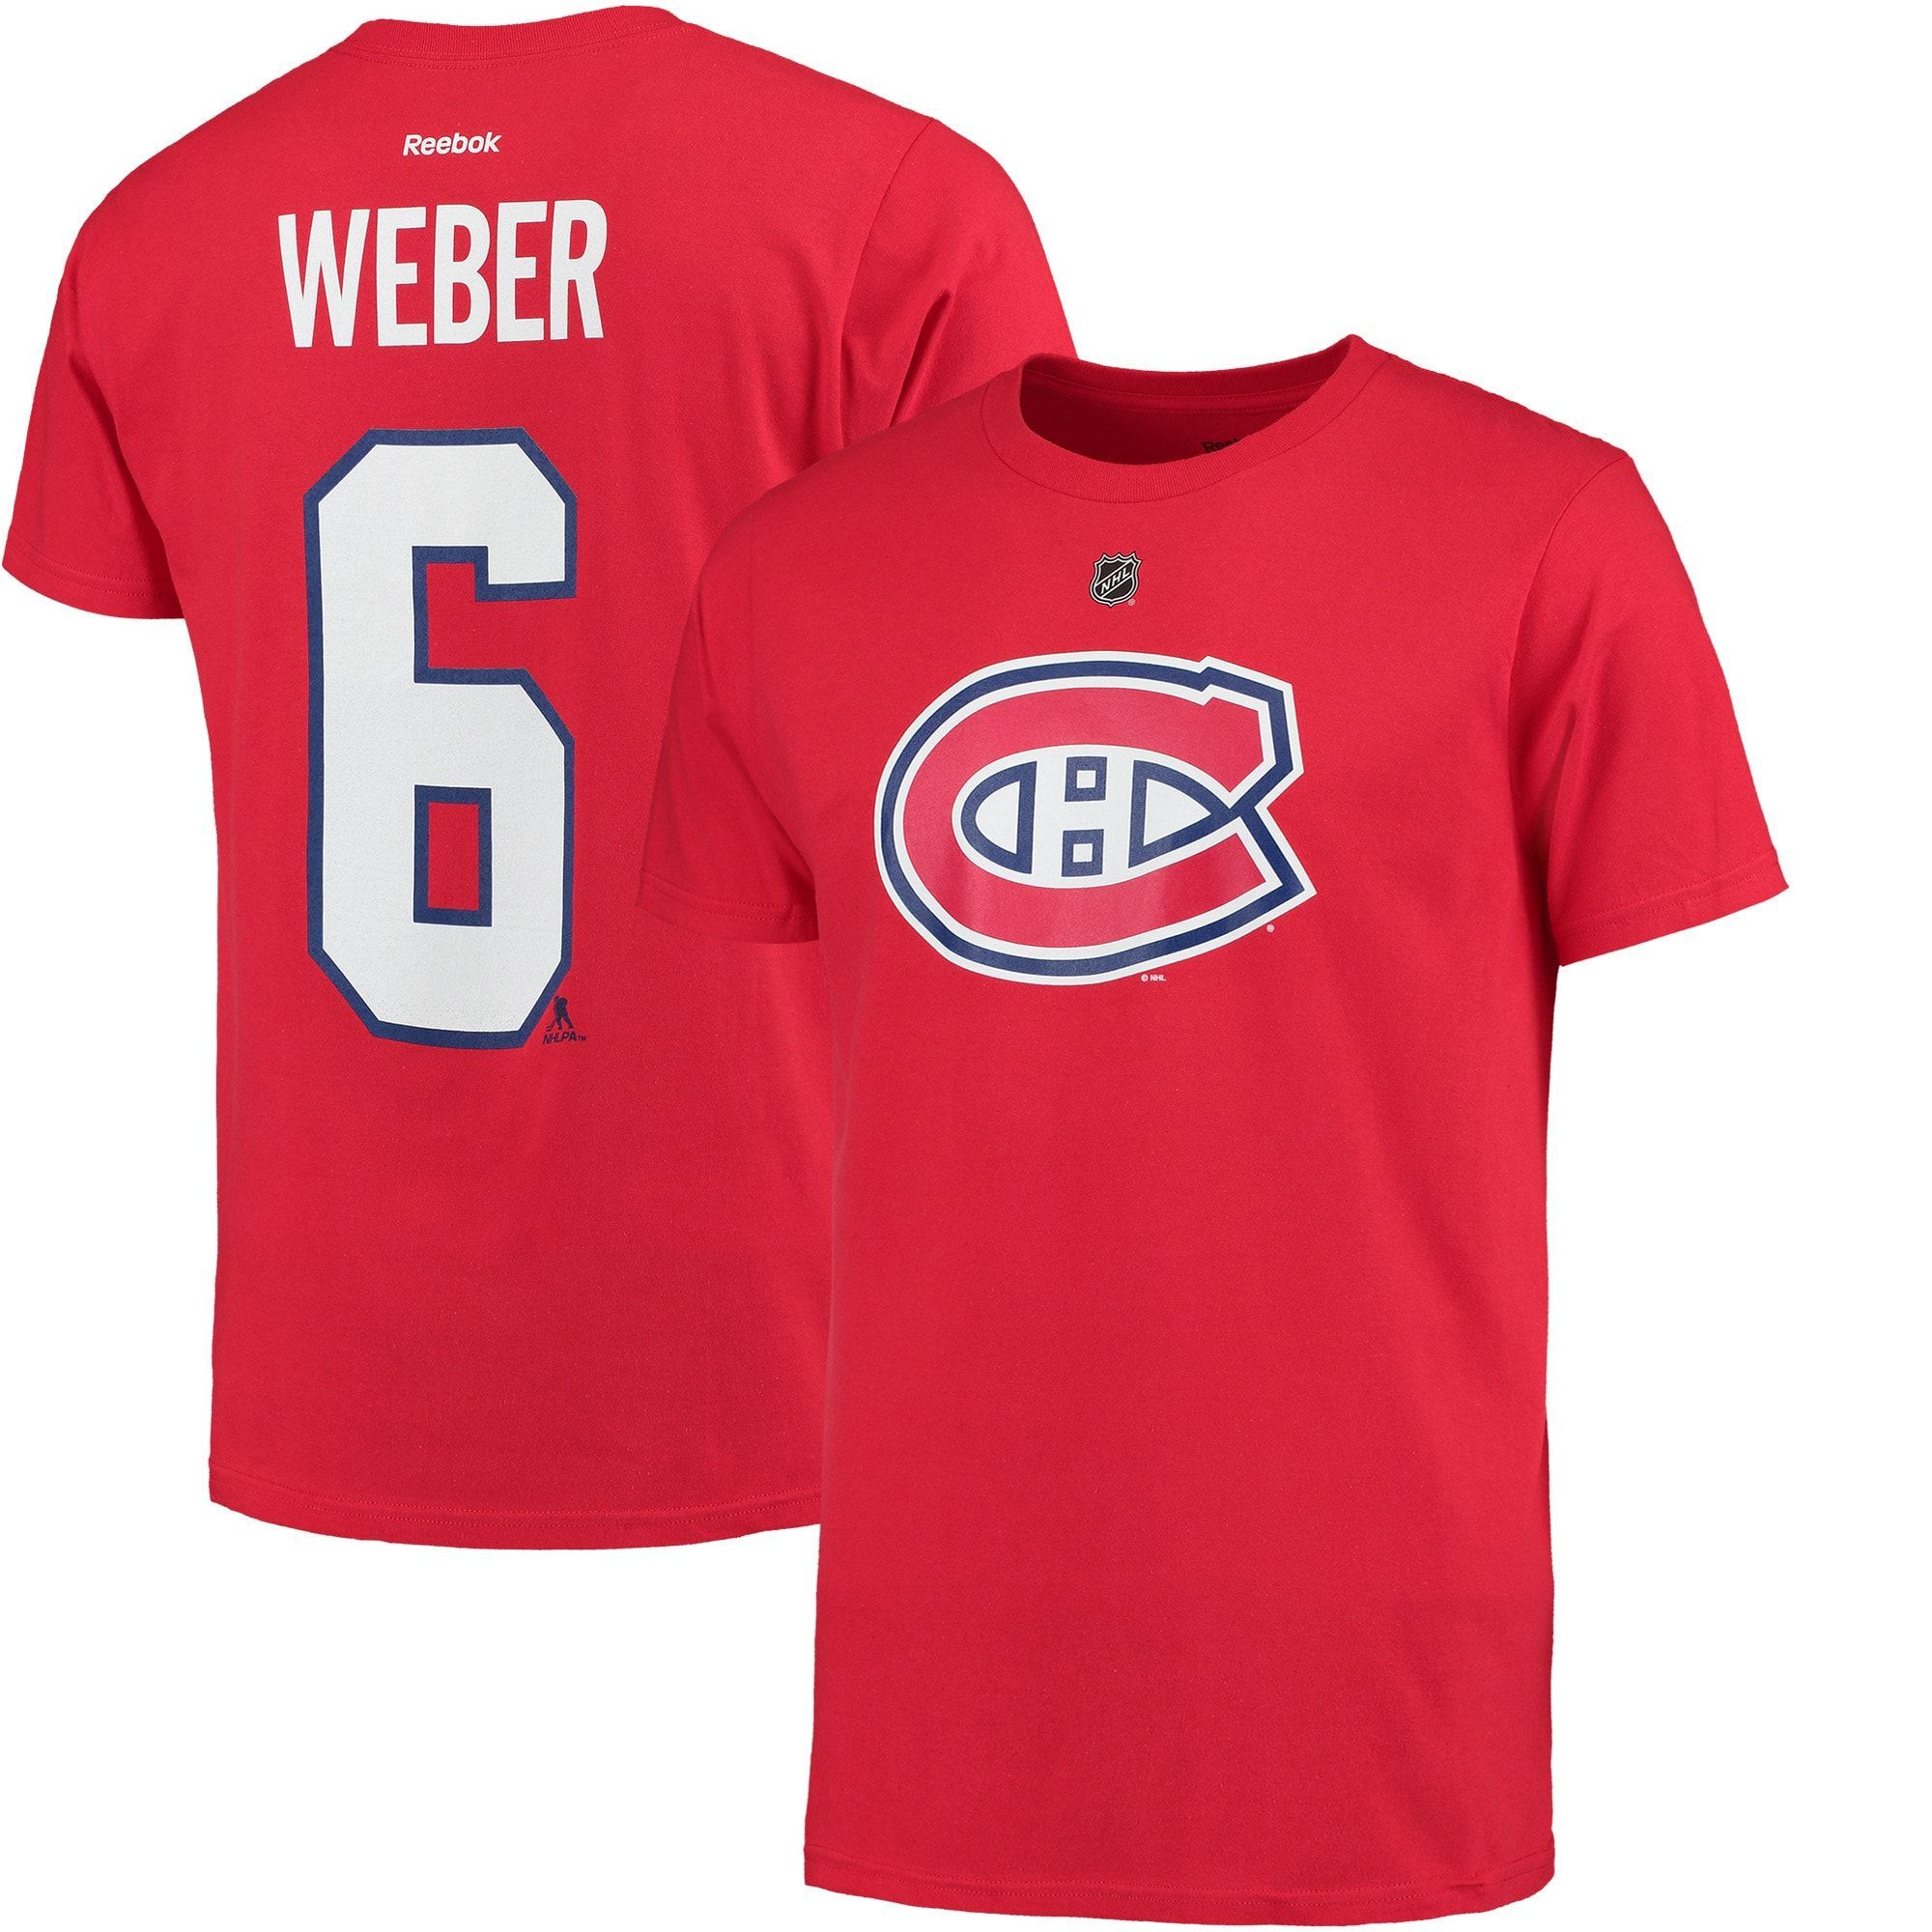 Men's Reebok Shea Weber Red Montreal Canadiens Name & Number T-Shirt